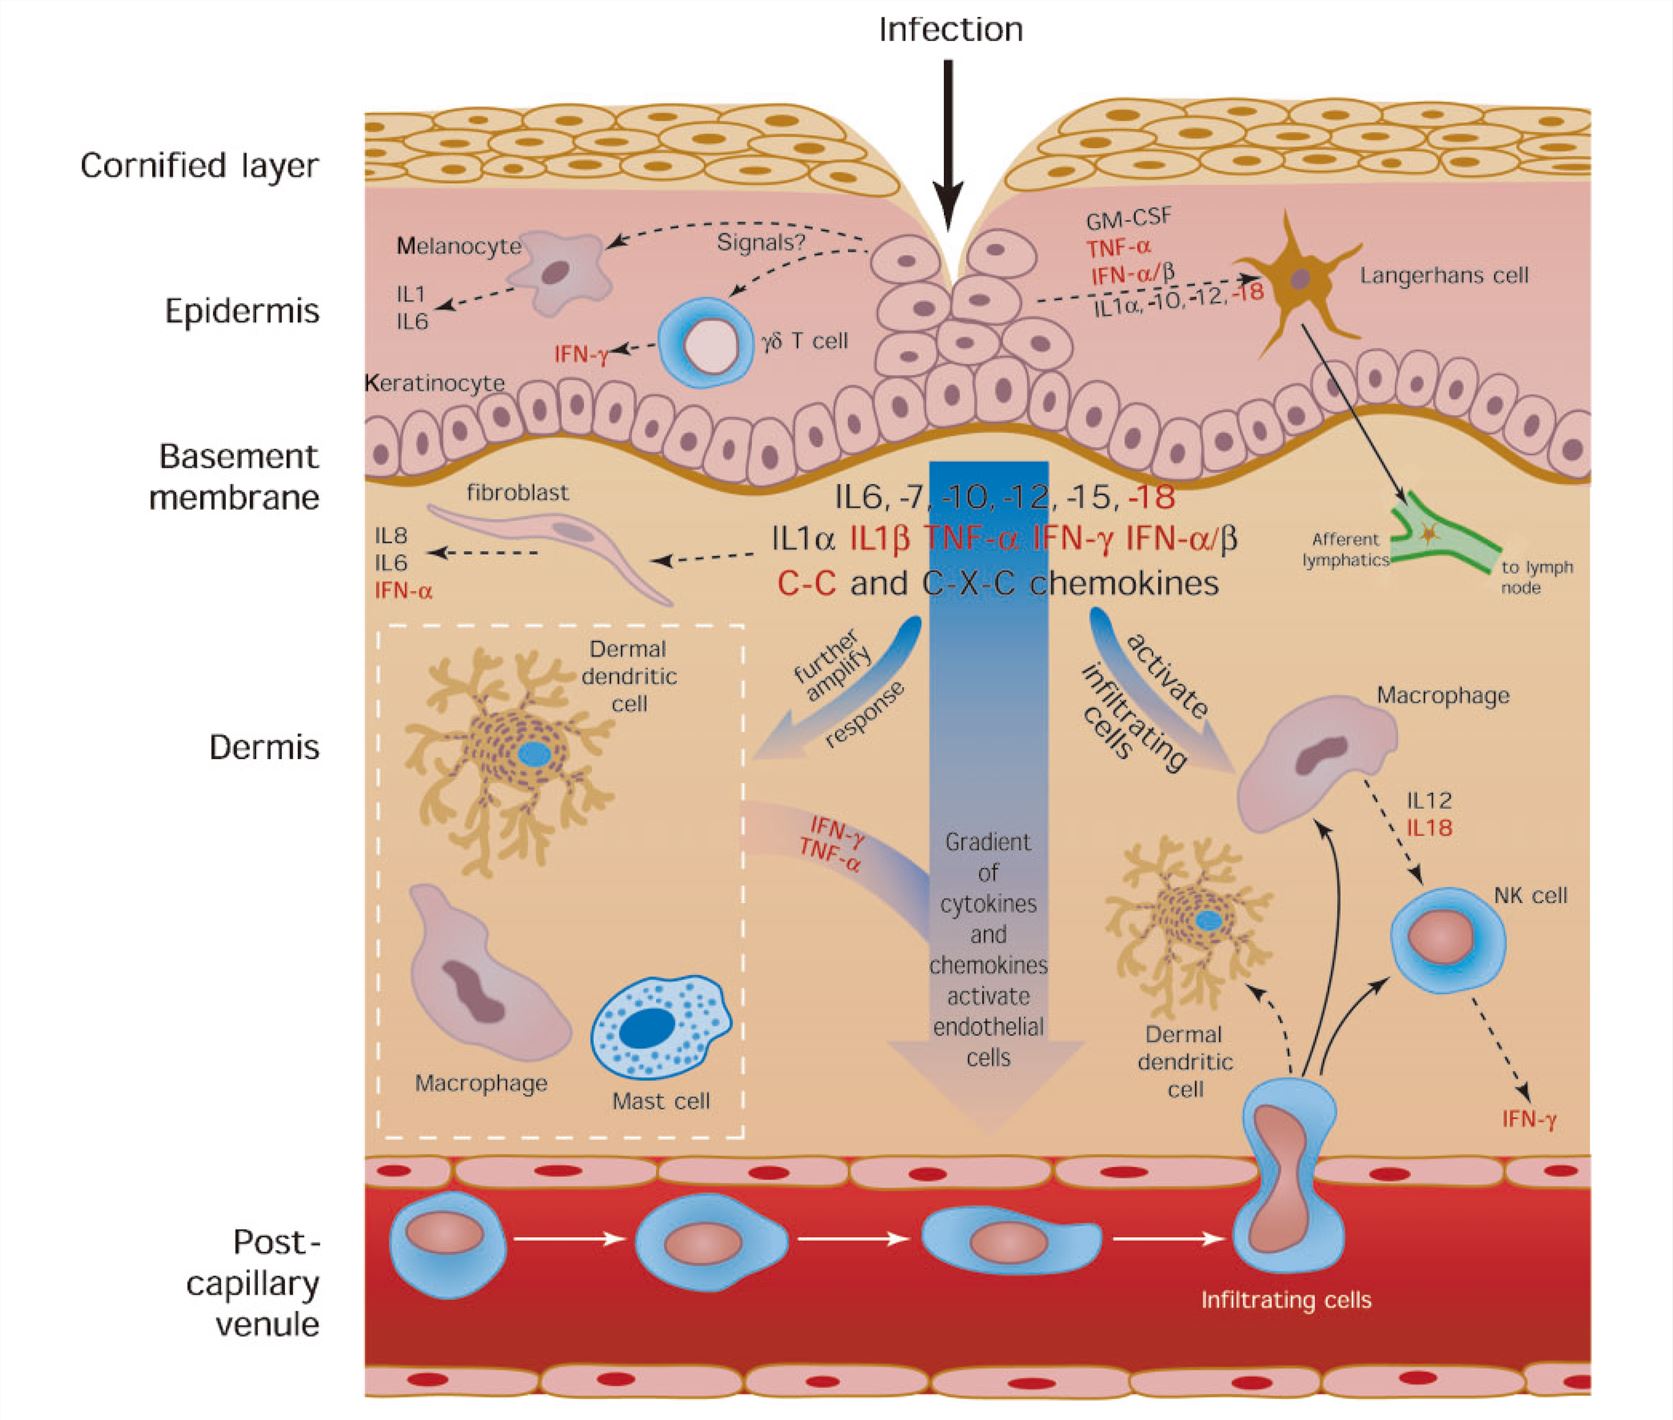 The cytokine and cellular network in the skin in response to infection